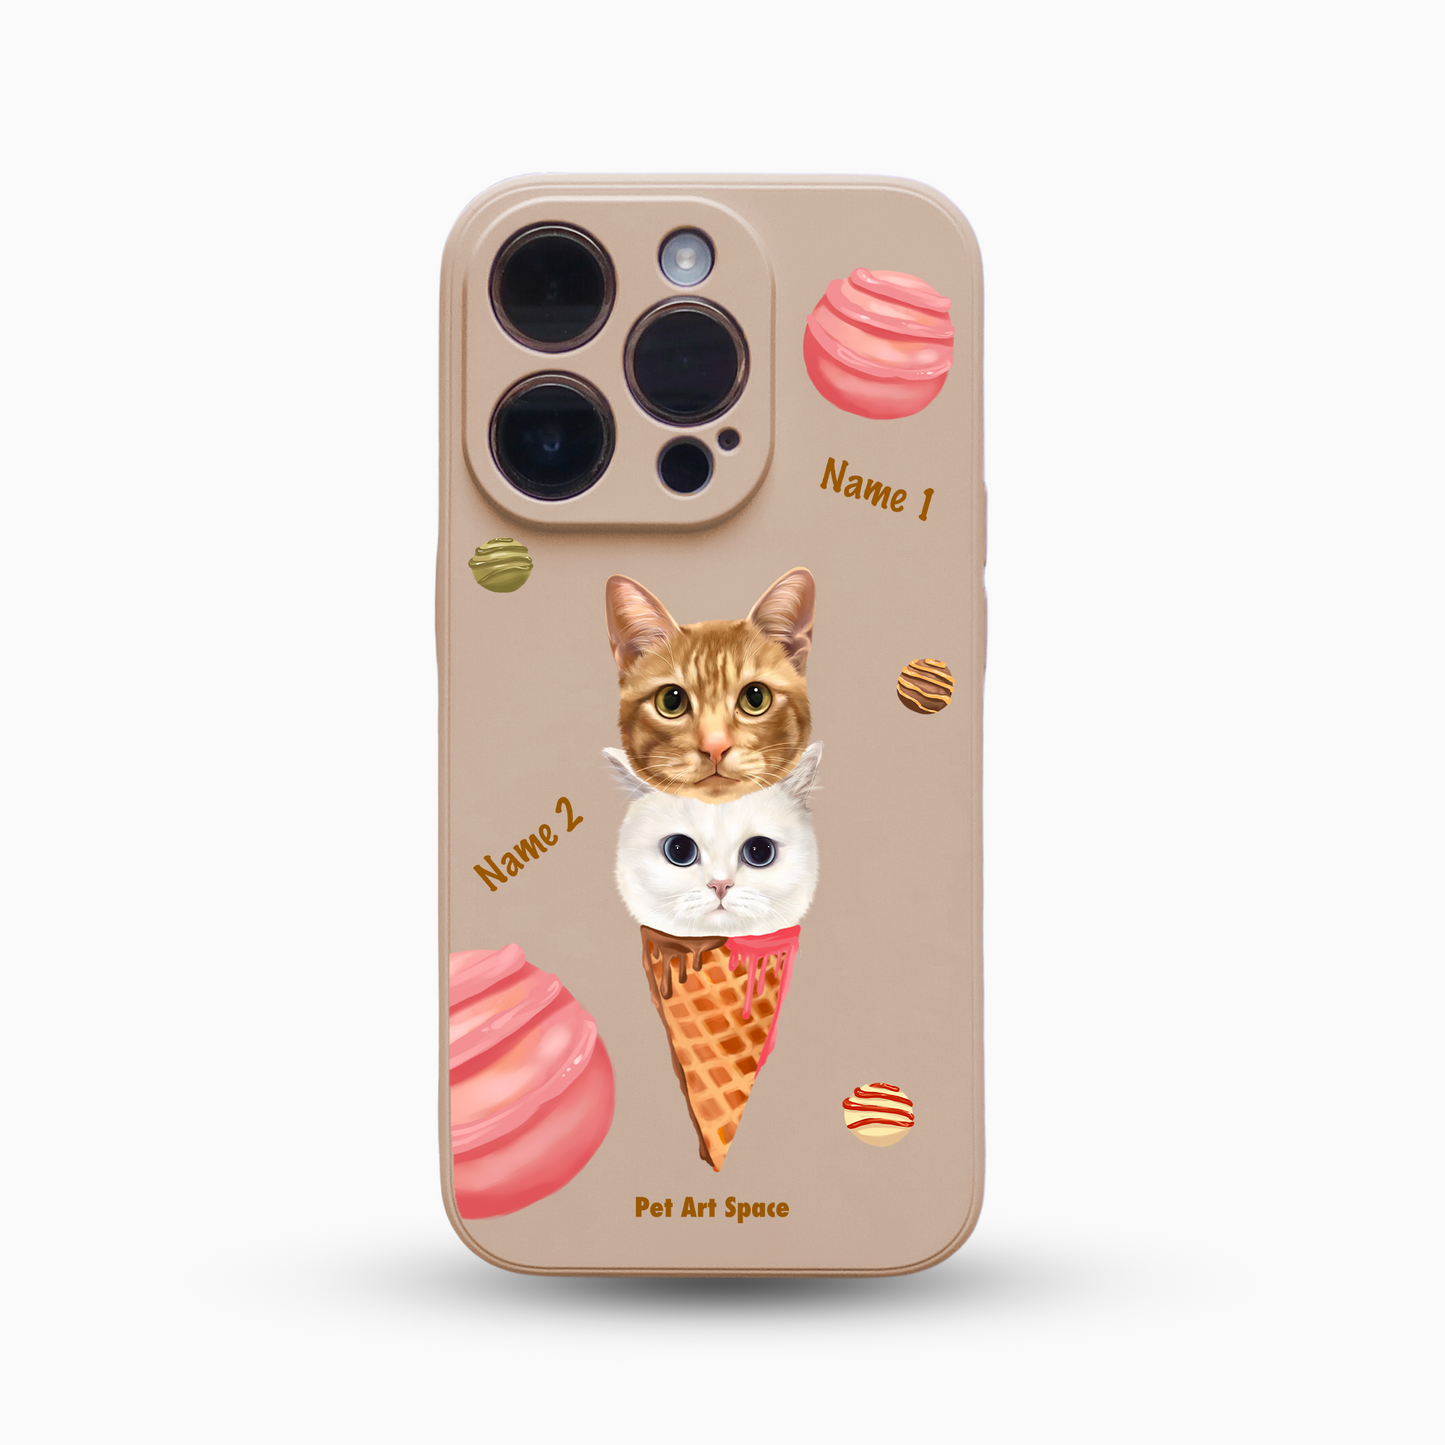 Ice Cream A for 2 Pets - Silicone Case Beige